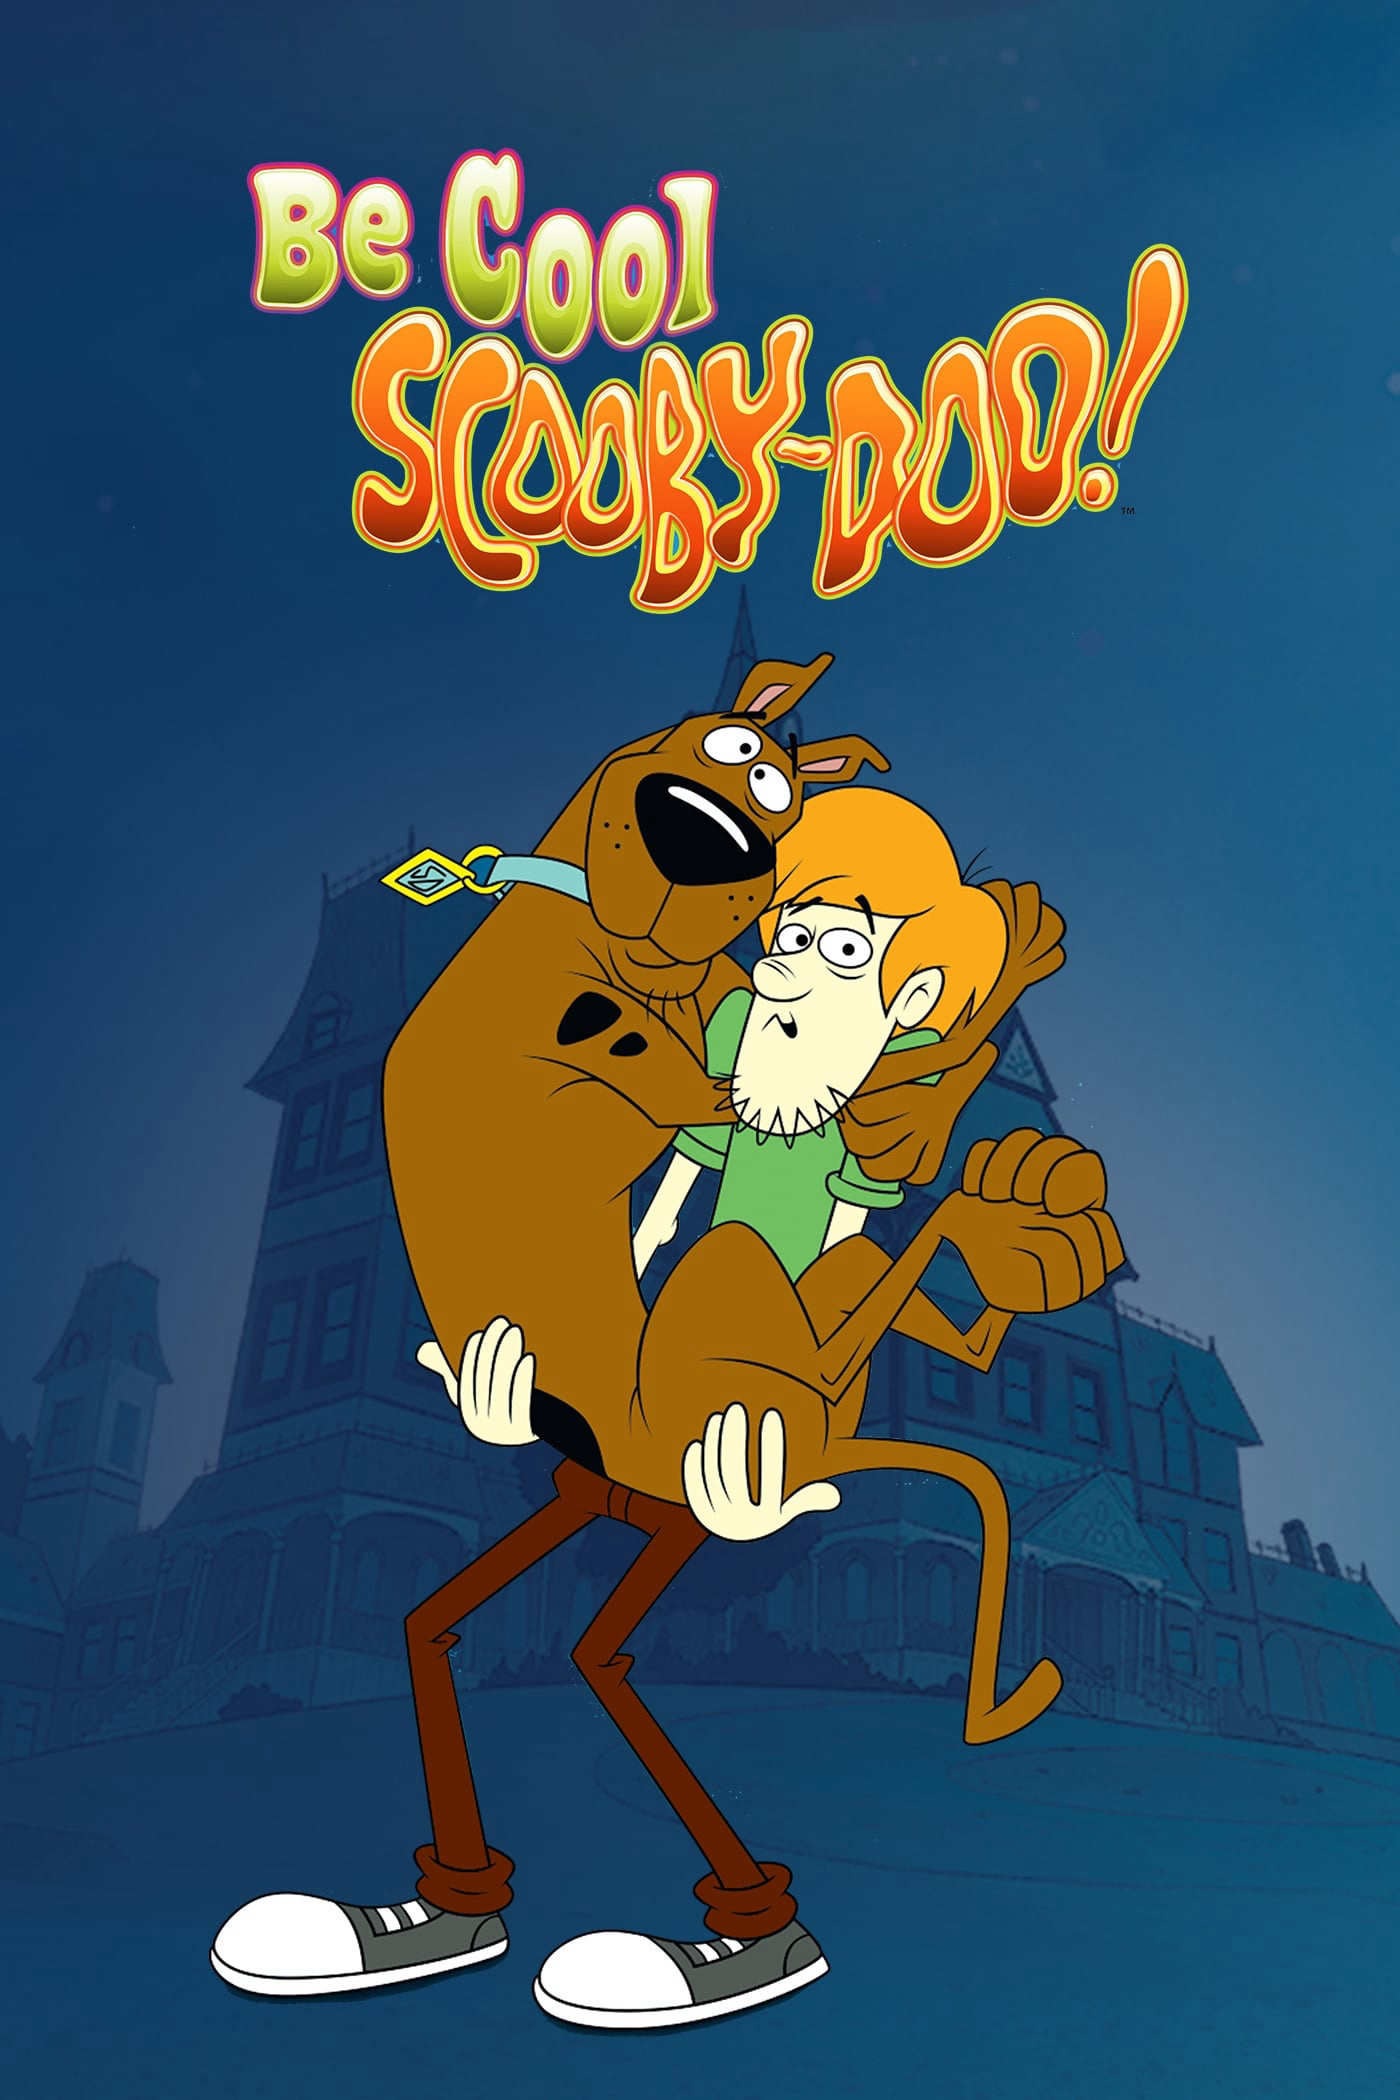 Poster Phim Be Cool, Scooby-Doo! (Phần 2) (Be Cool, Scooby-Doo! (Season 2))